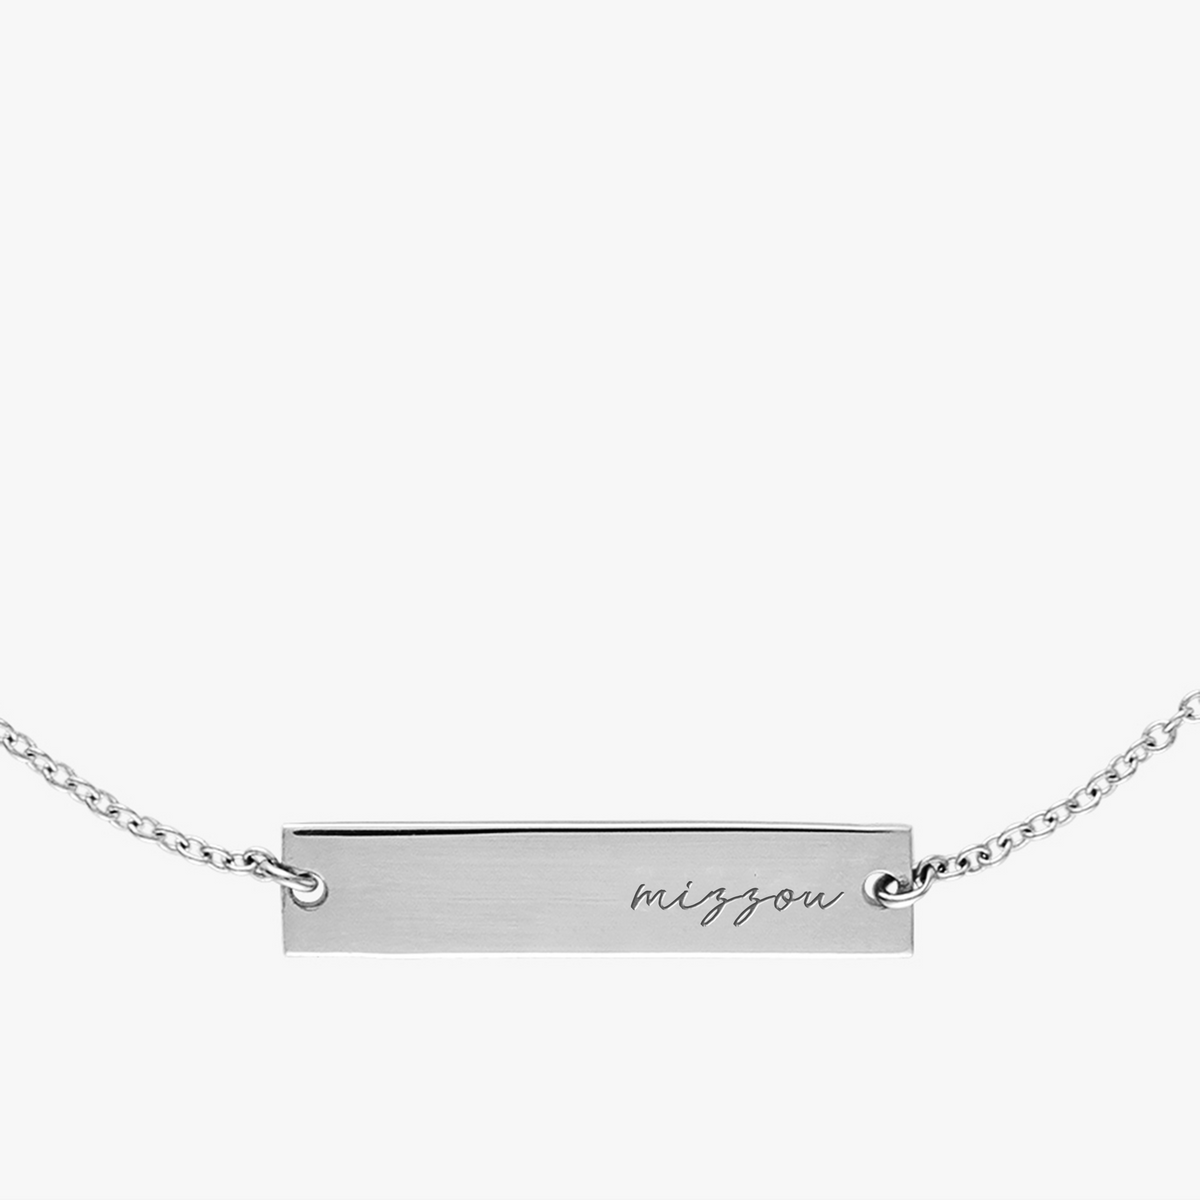 Mizzou Horizontal Necklace Sterling Silver Close Up